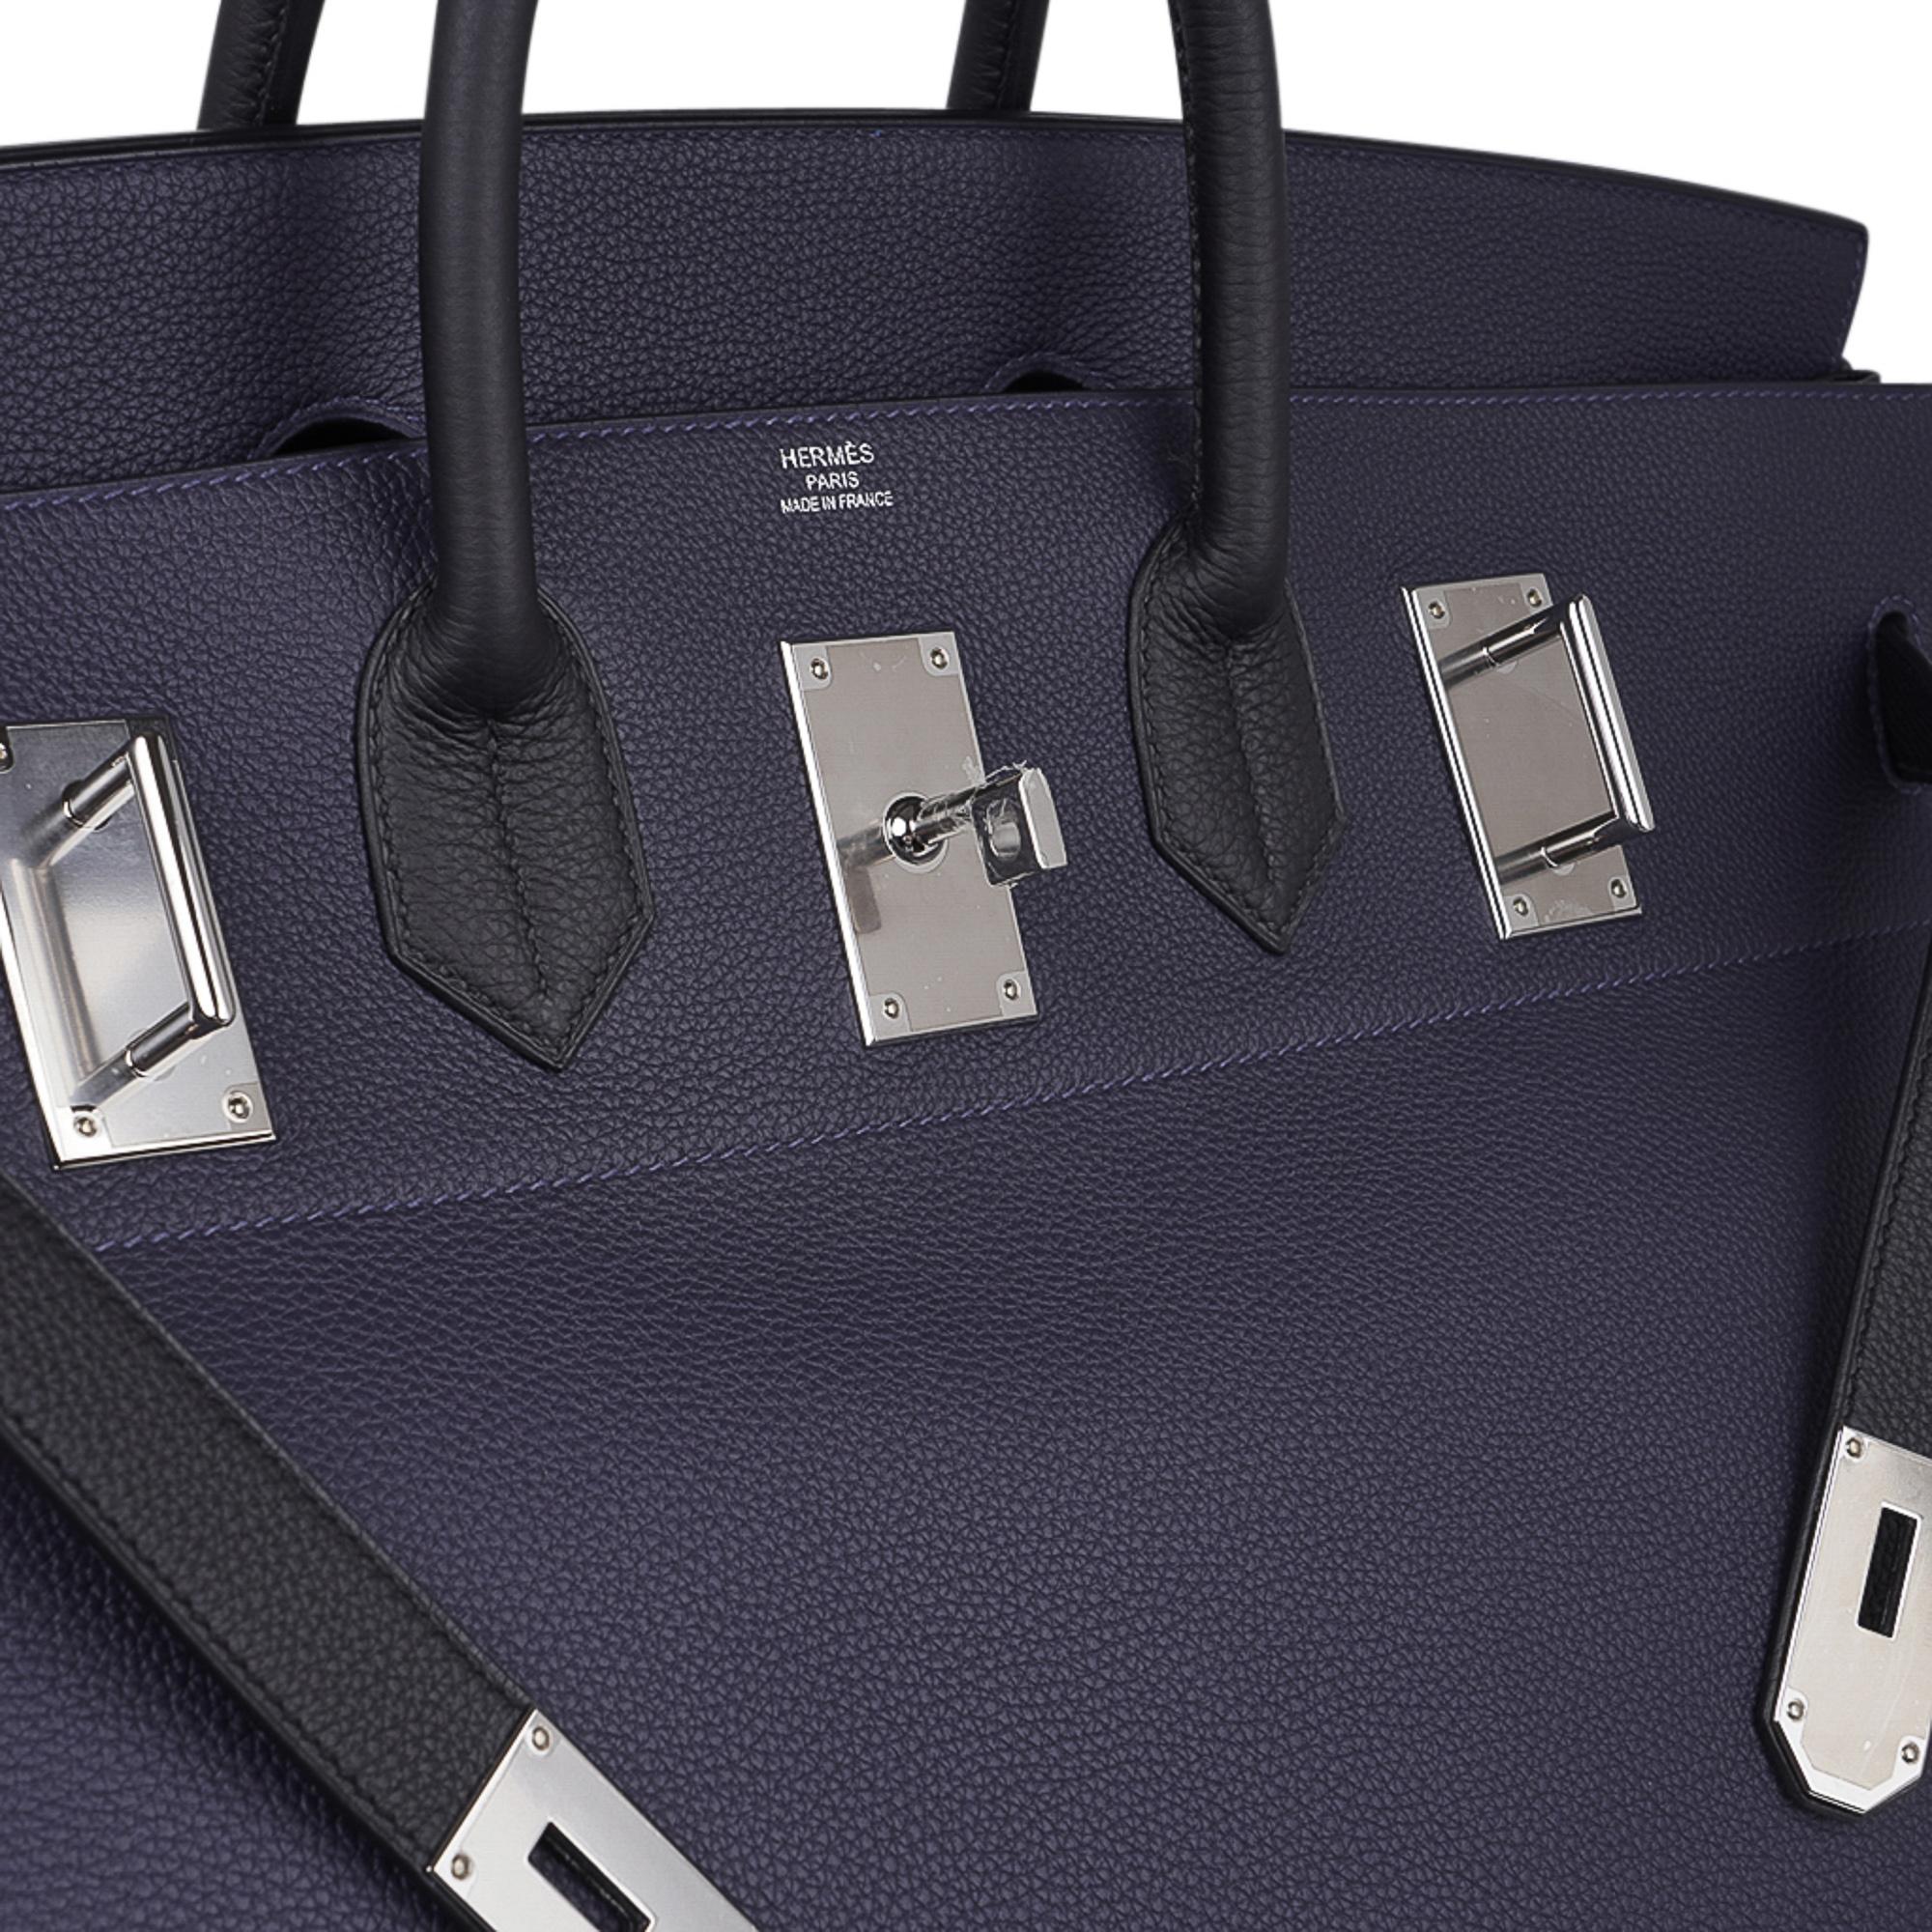 Mightychic offers a very rare Bi-color Hermes Hac  50 bag - Sac Haut a Courroies - featured in Blue Nuit and Black.  
Beautiful sophisticated combination with Palladium hardware.  
Togo leather is highly scratch resistant. 
This beautiful travel bag